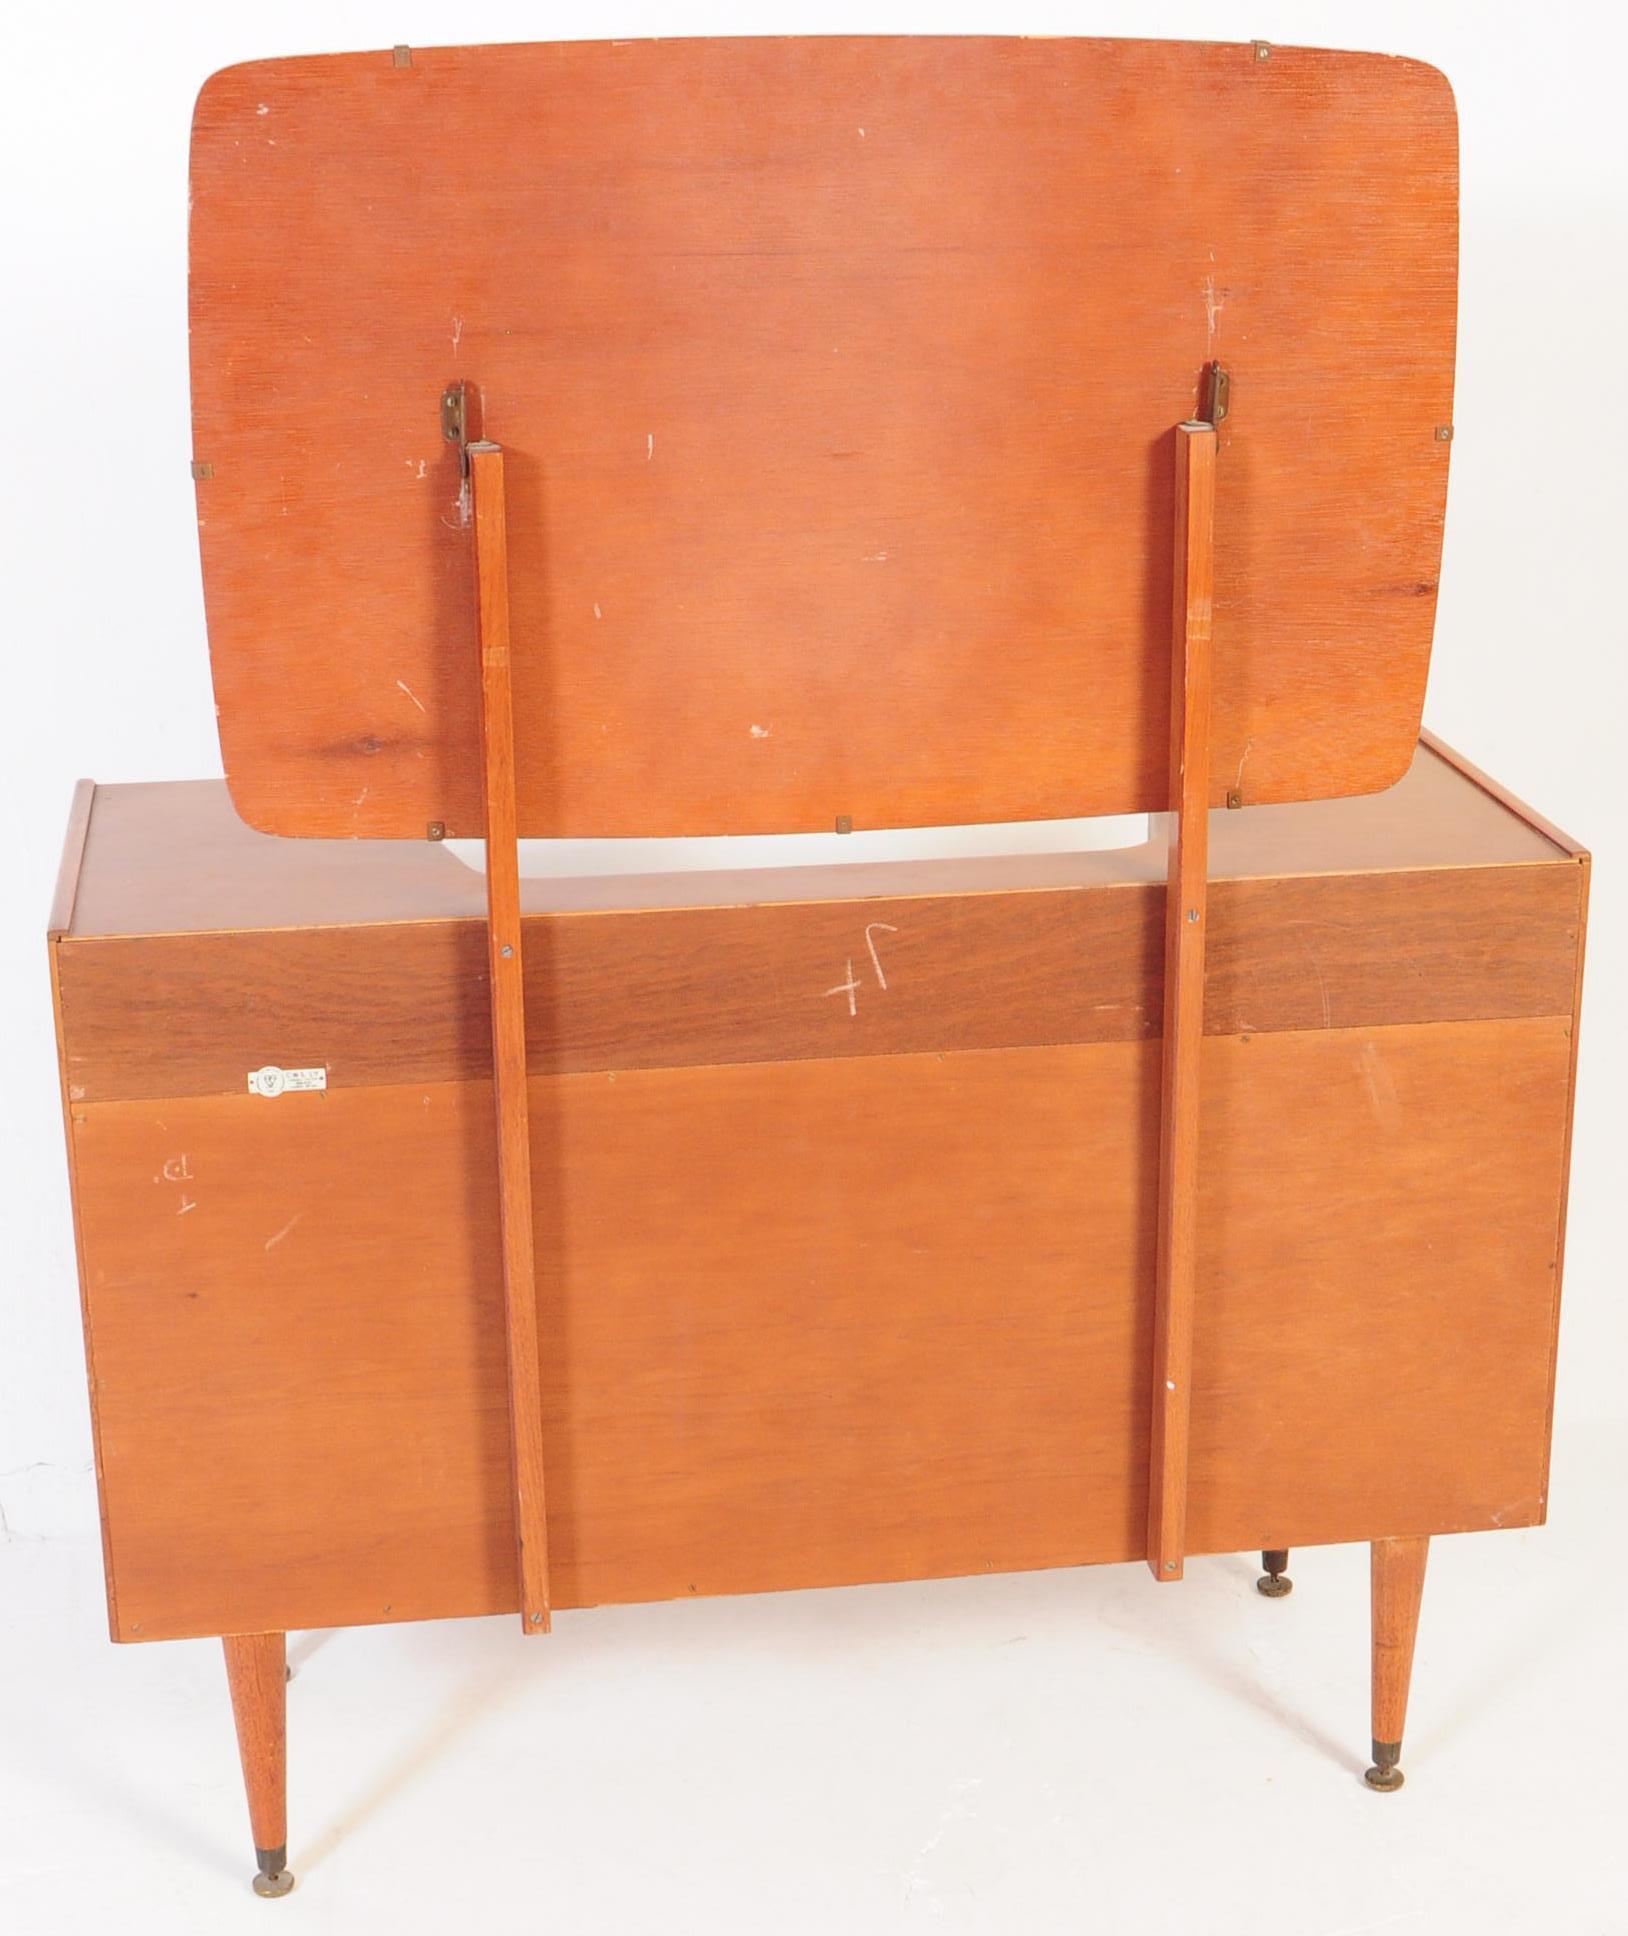 RETRO MID CENTURY TEAK DRESSING TABLE CHEST OF DRAWERS - Image 7 of 8